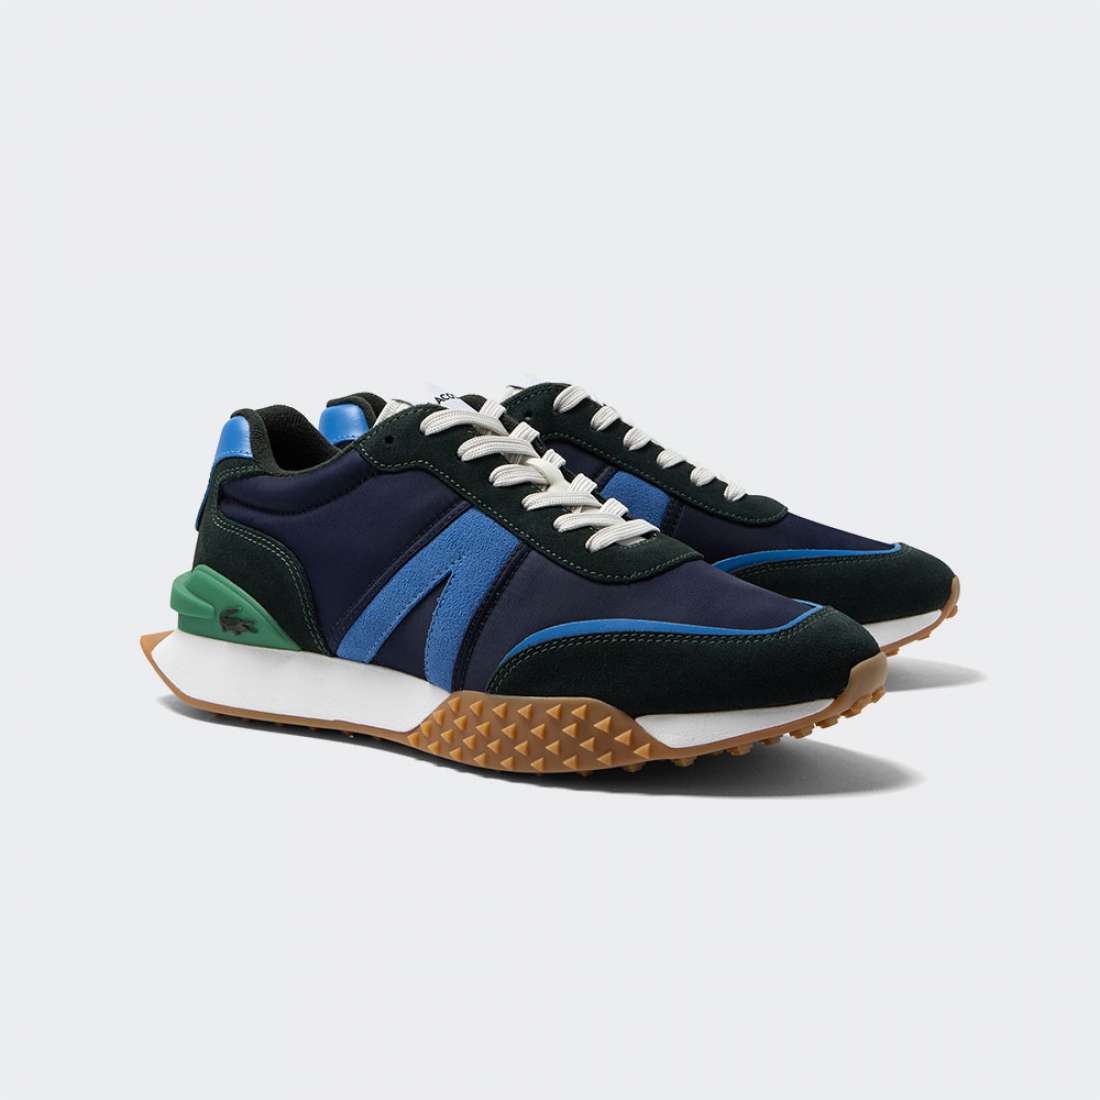 LACOSTE L-SPIN DELUXE NVY/BLU